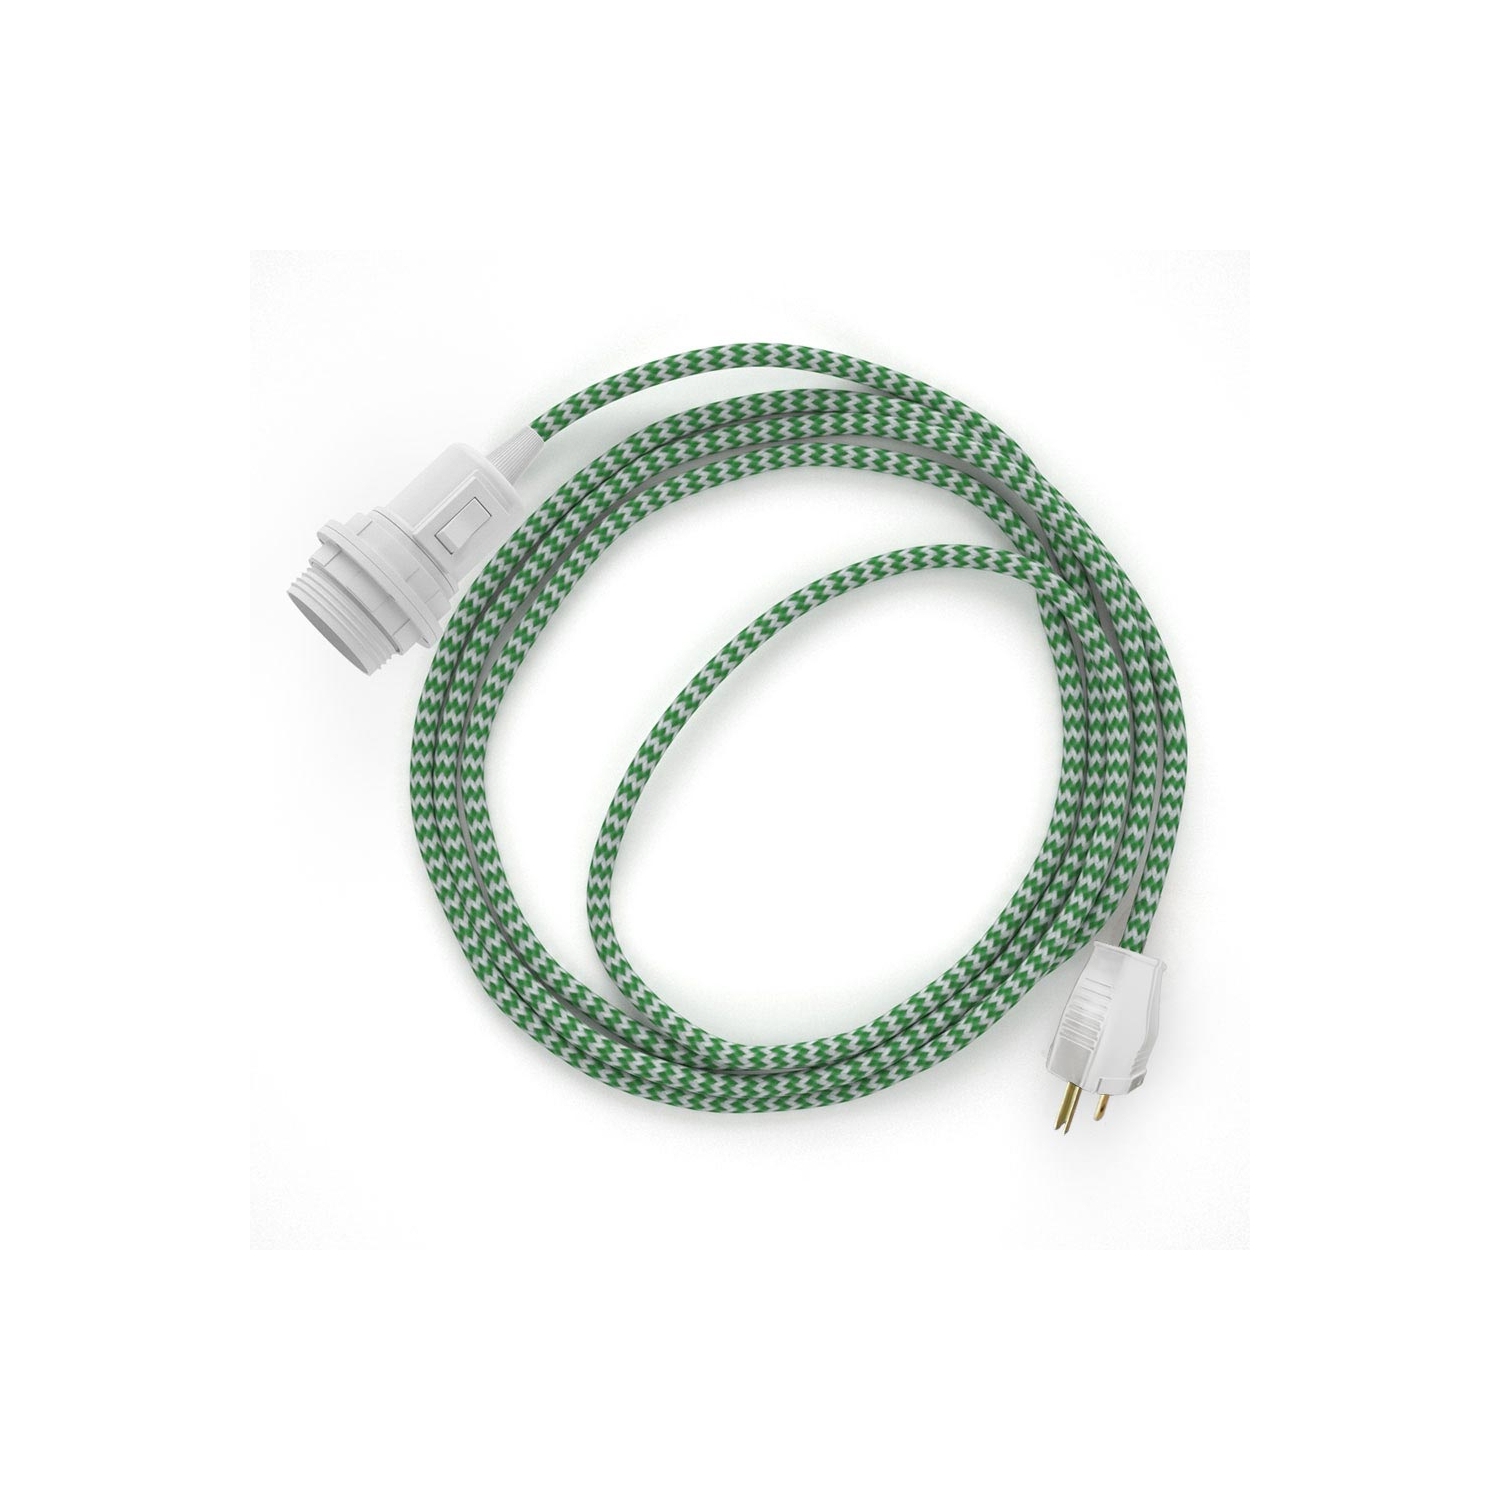 Plug-in Pendant for Lampshade with switch on socket | RZ06 Green & White Chevron